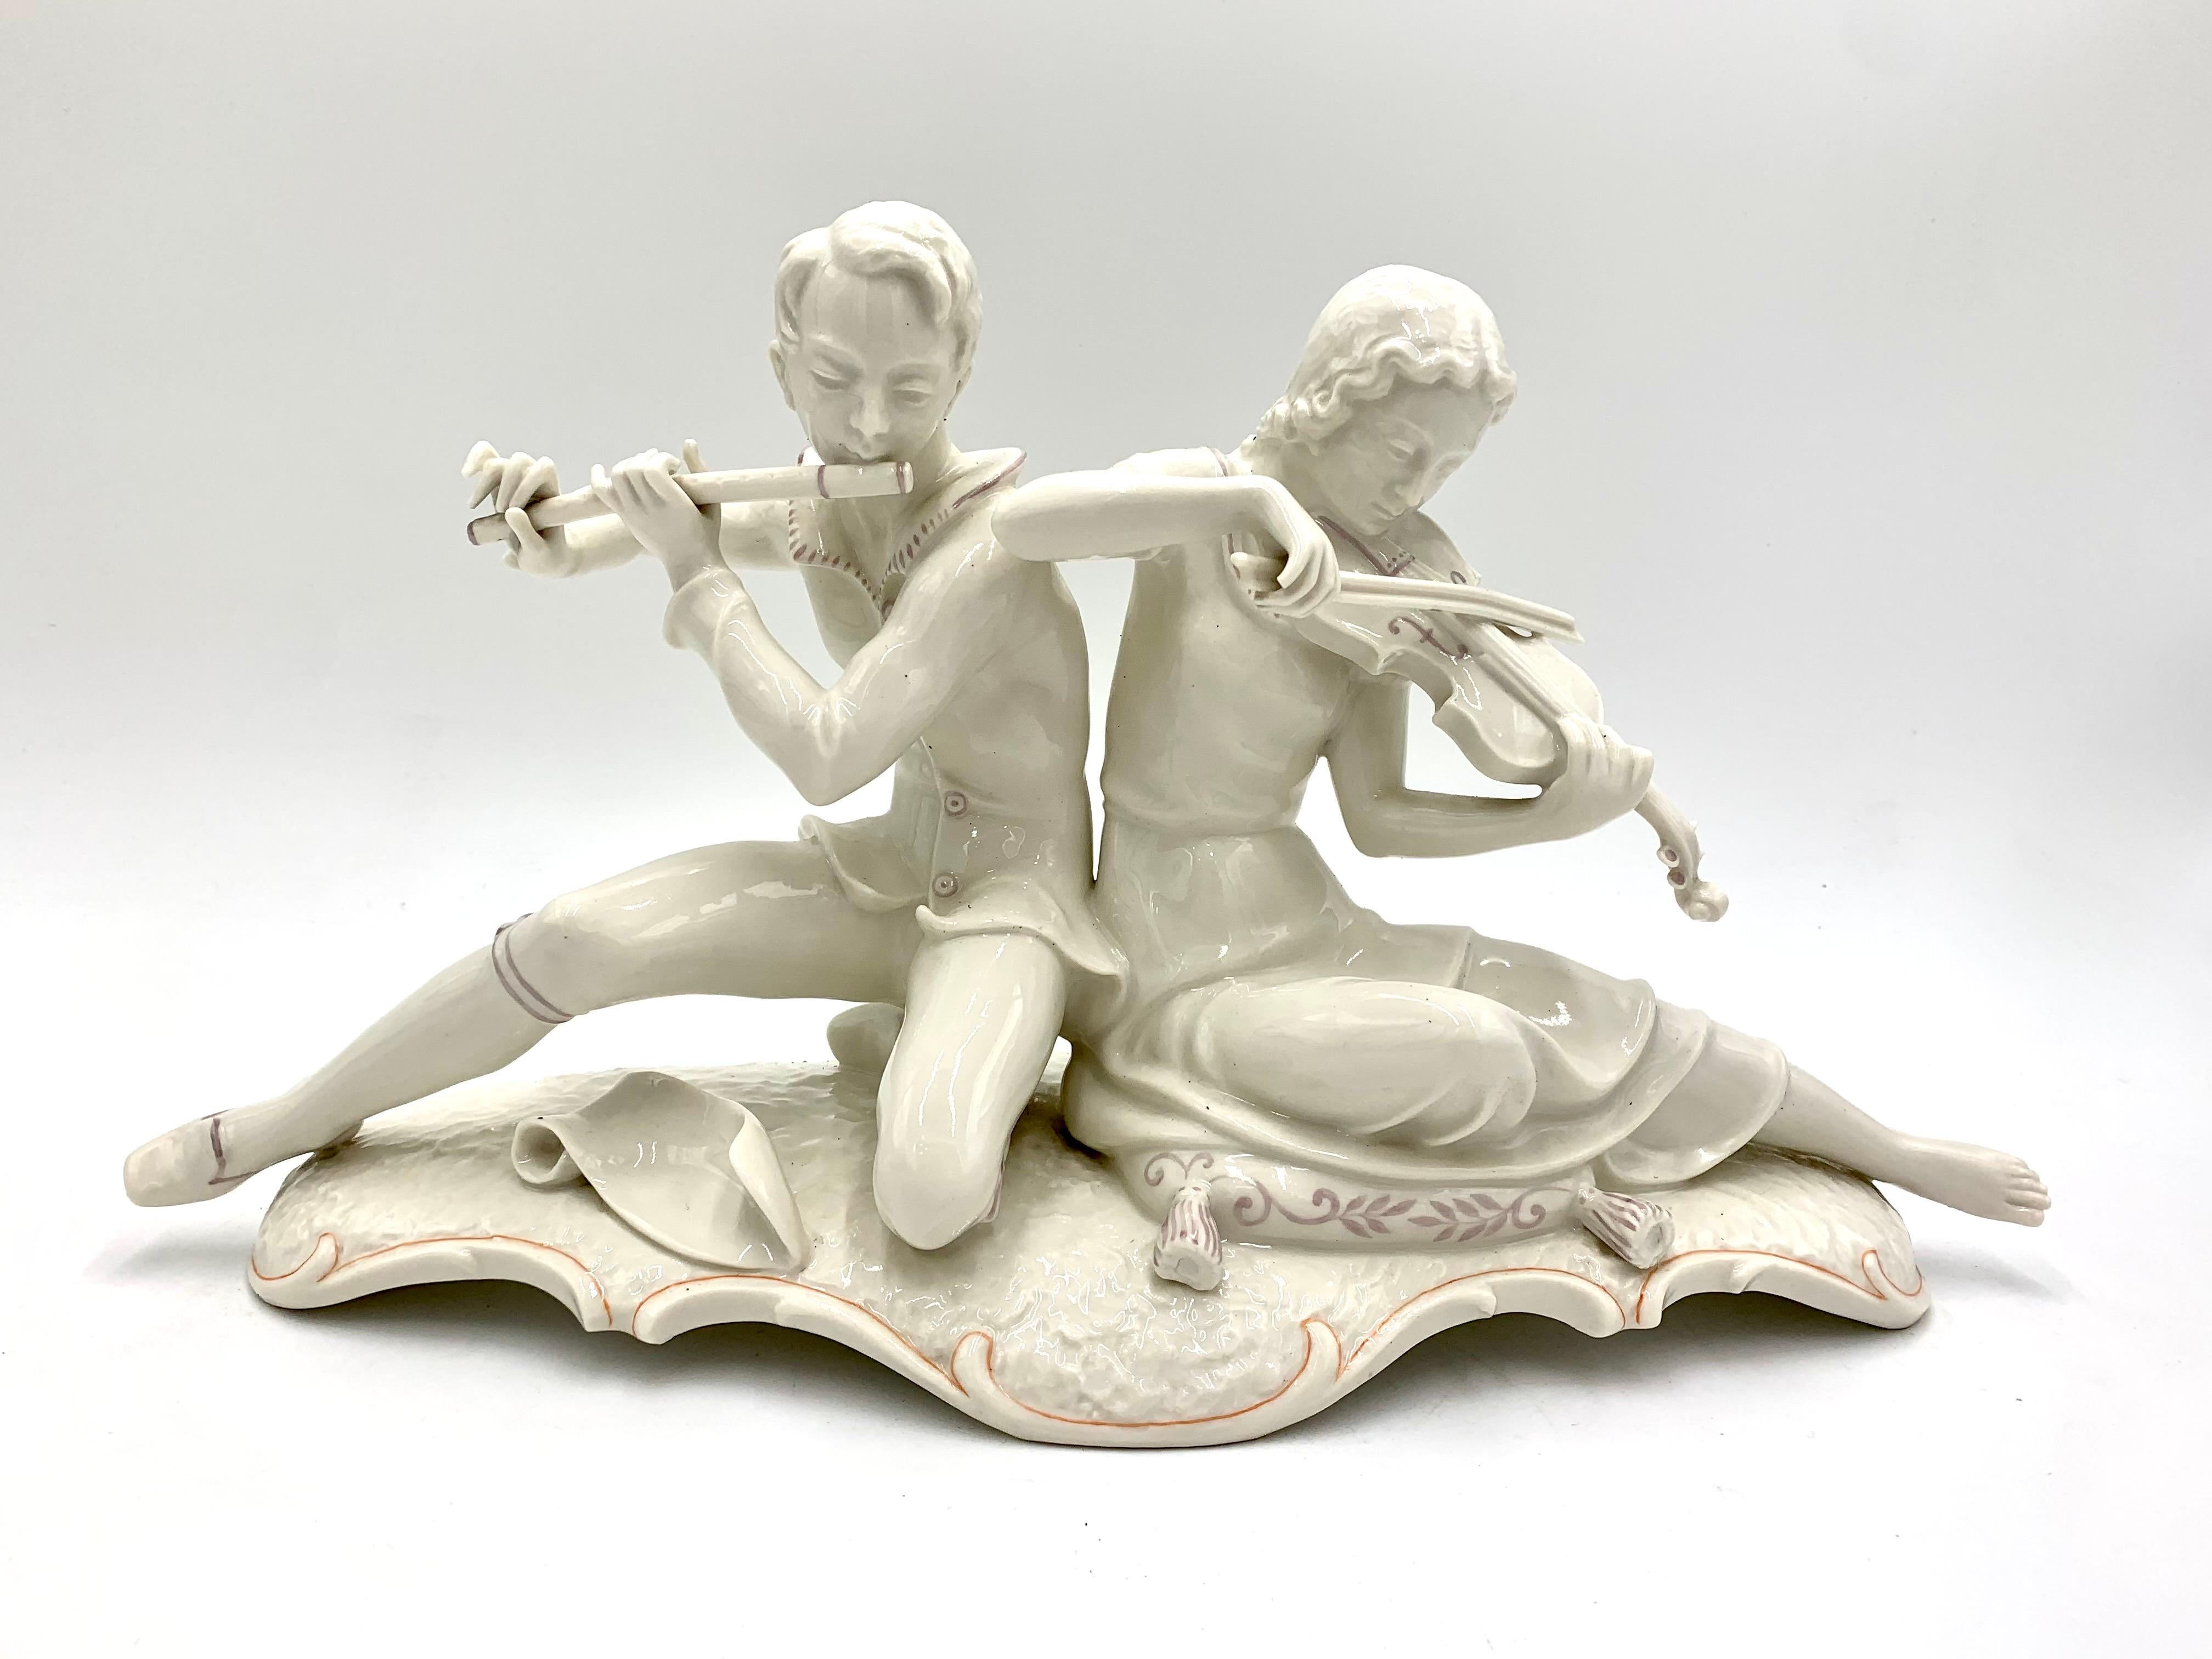 A large collectible figurine depicting a pair of musicians - a pair playing instruments.
Signed Hutschenreuther Selb - Germany Kunstabteilung. The mark used in the years 1955-68
Very good condition, no damage.
Dimensions: height 22 cm, width 40